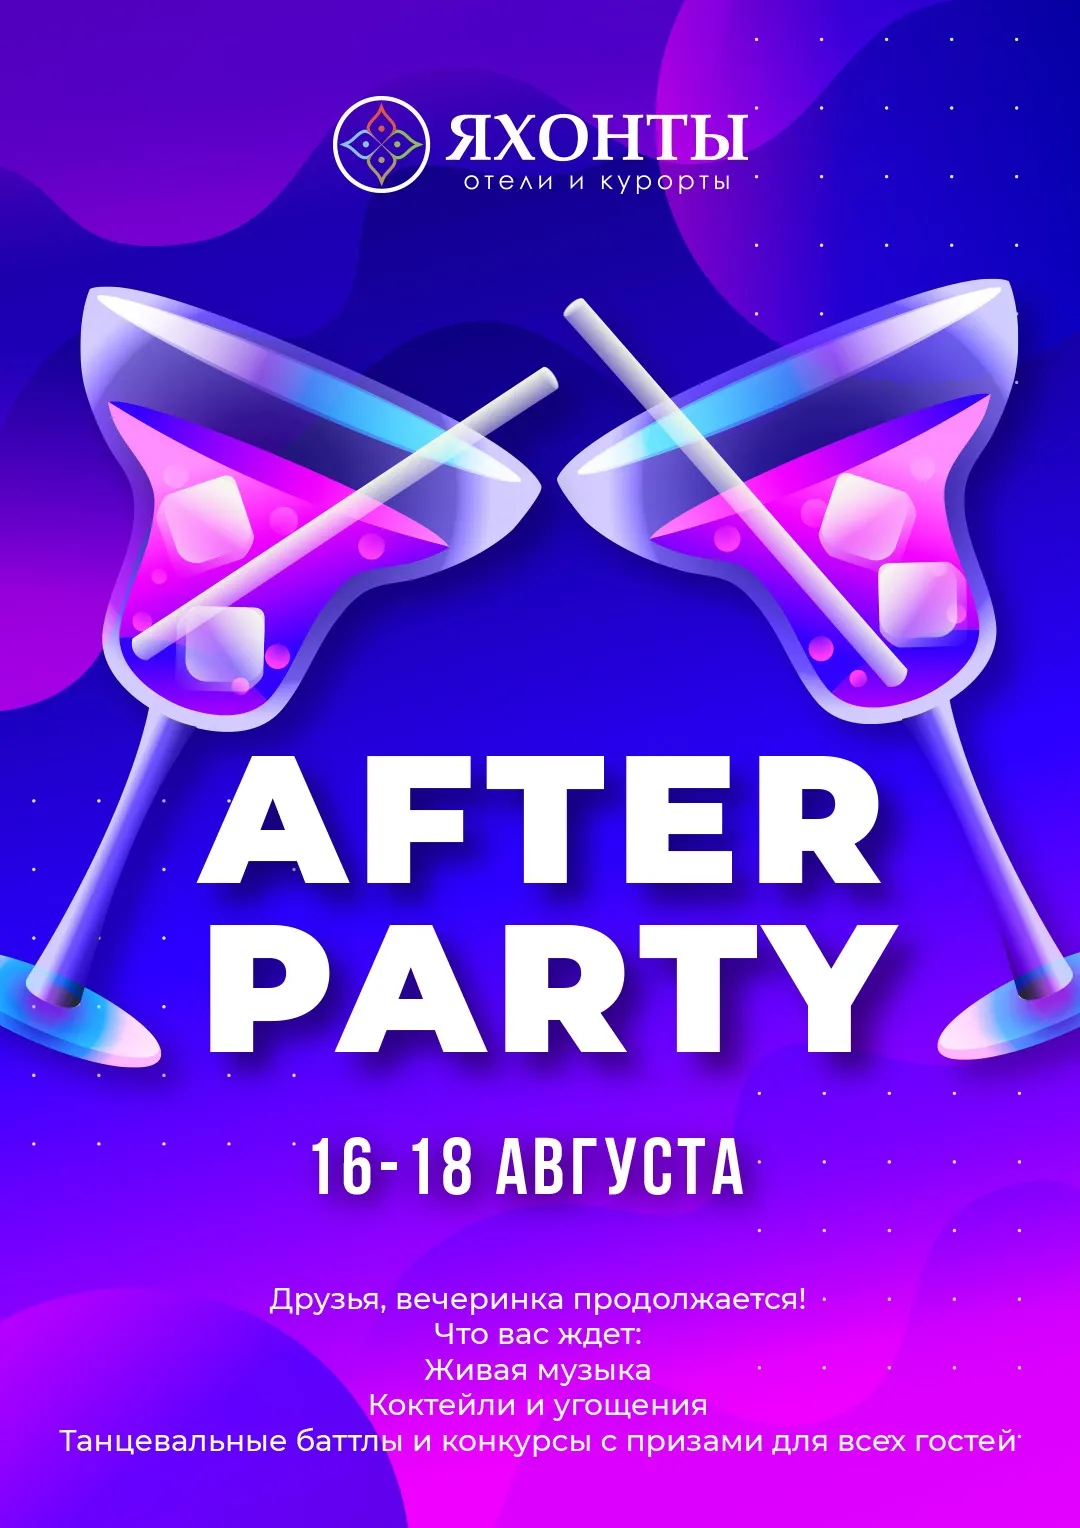 After party!